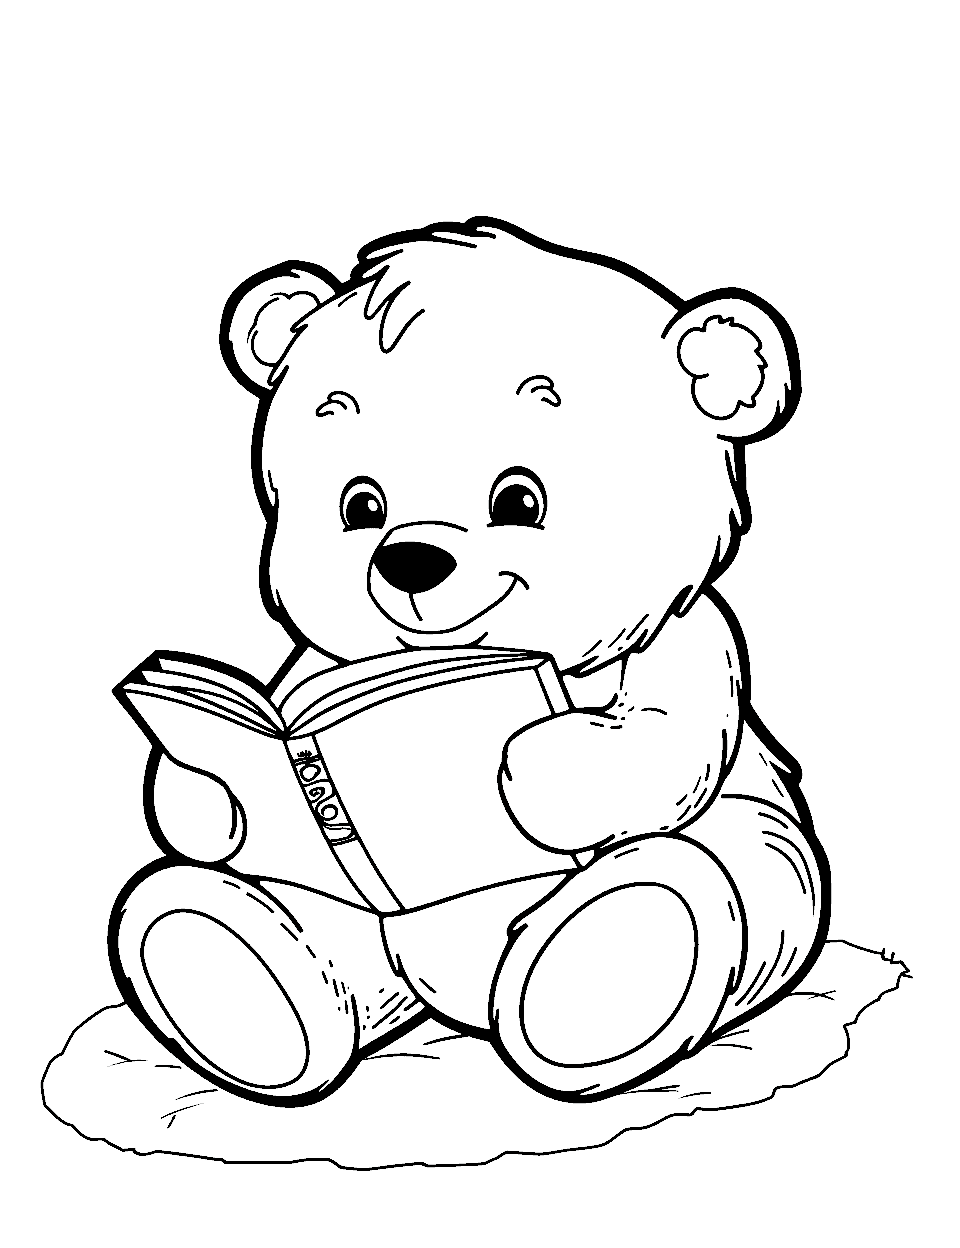 Reading Teddy Bear Coloring Page - A teddy bear sitting and reading a book with a happy expression.